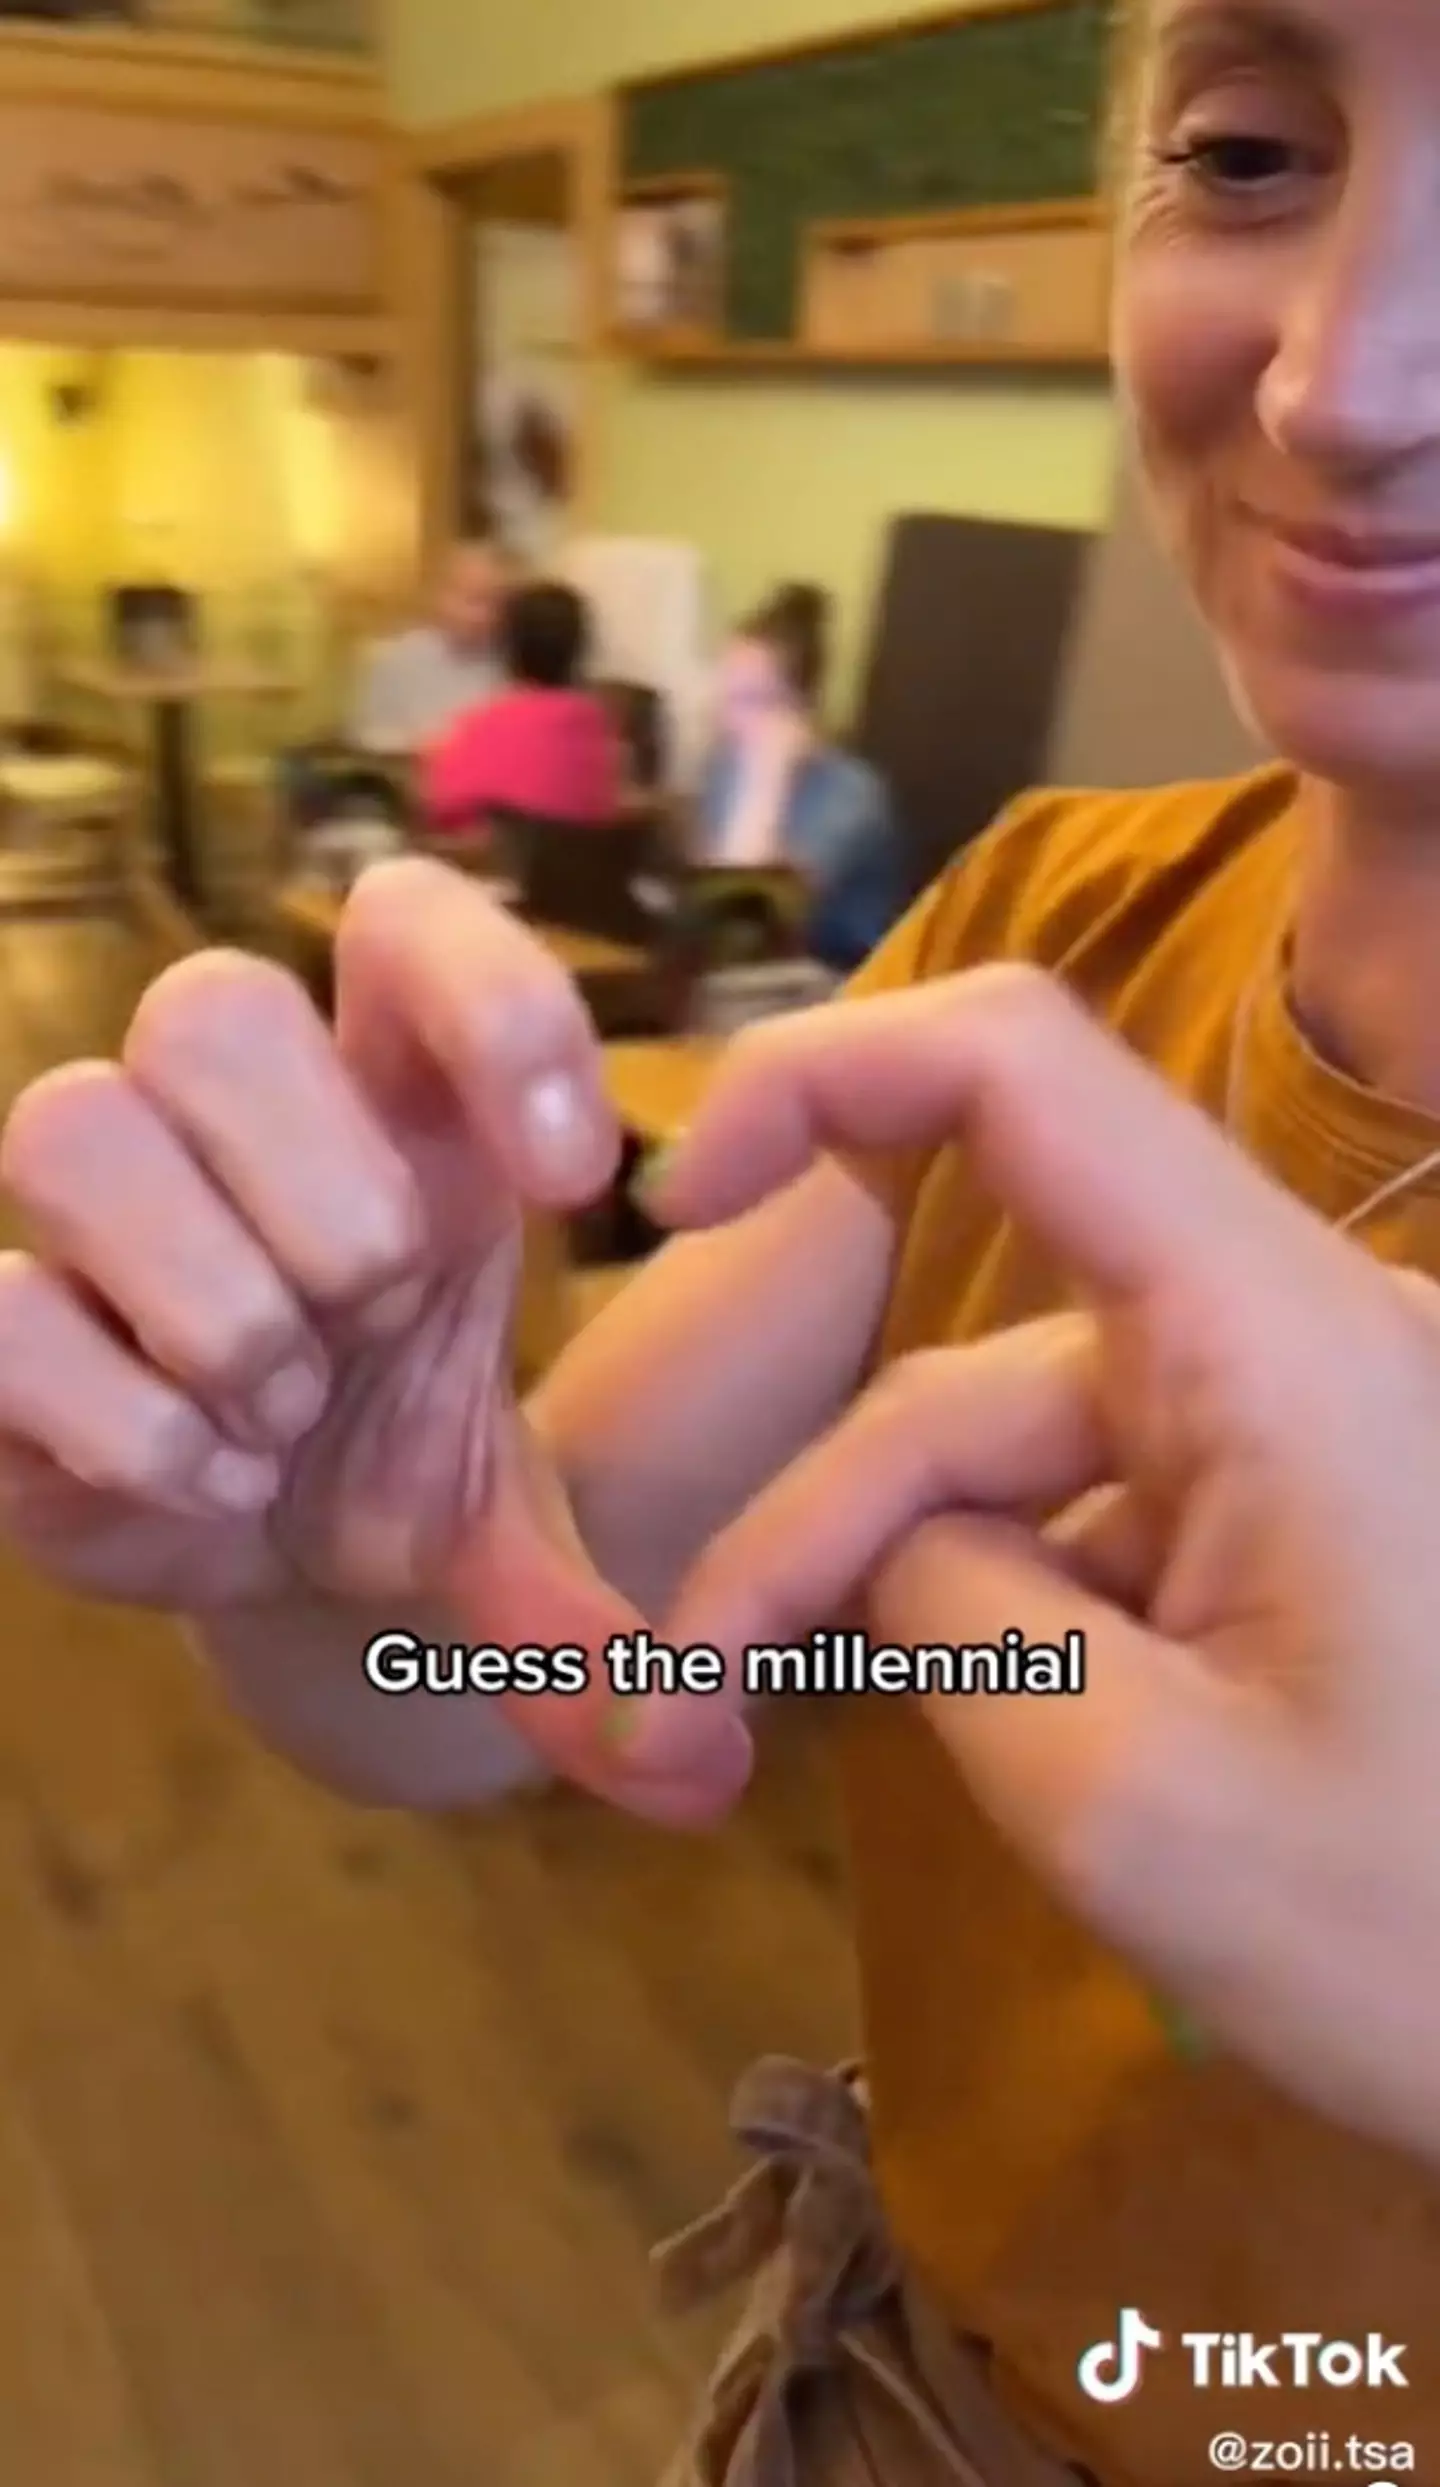 The Millennial has a giveaway sign.